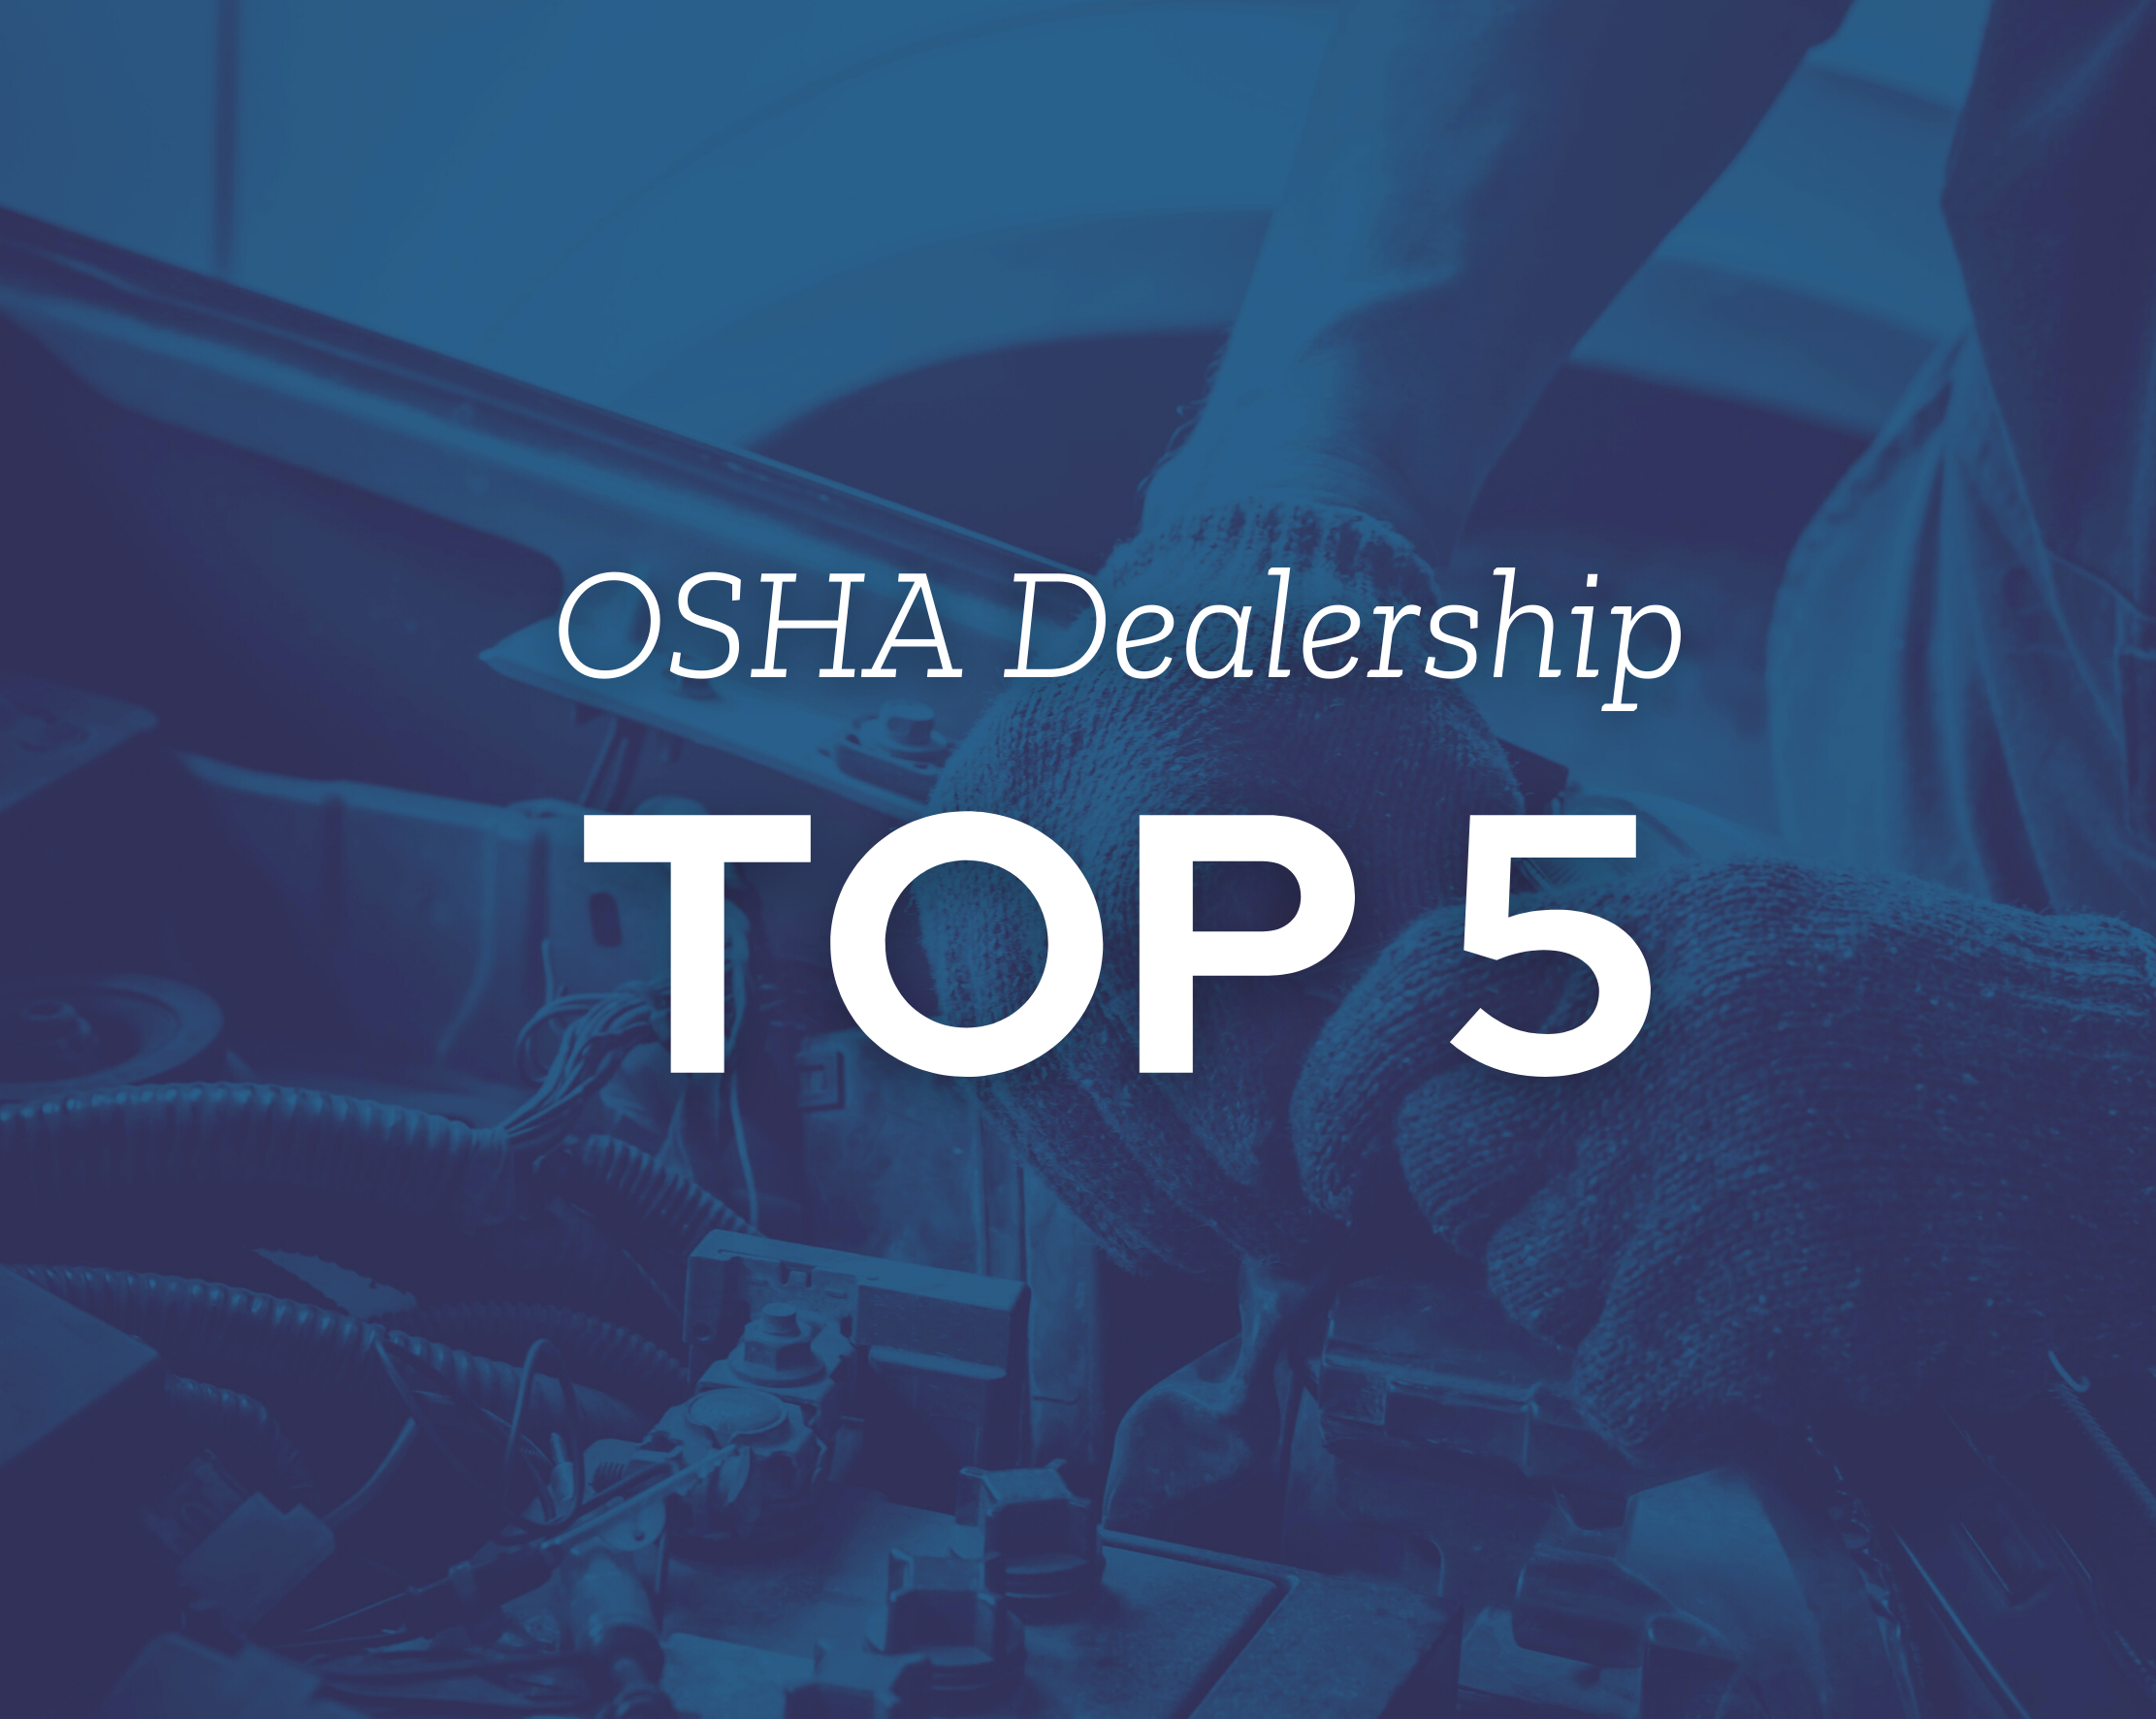 OSHA’s Top 5 Violations for Dealers and Repair Shops in 2022